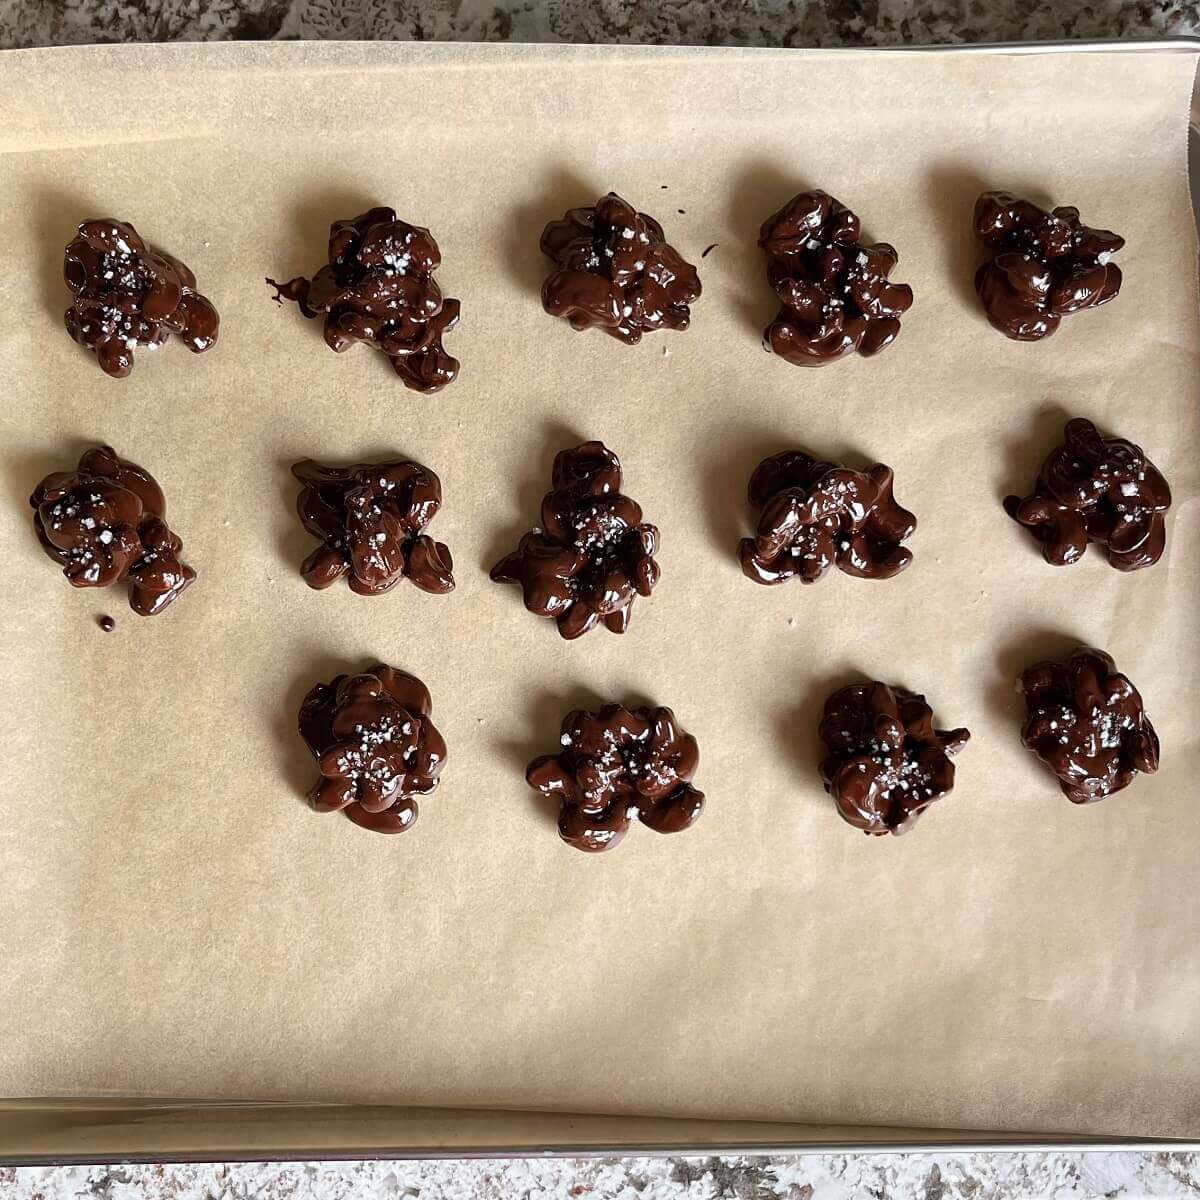 Chocolate cashew clusters on a sheet pan lined with parchment paper.